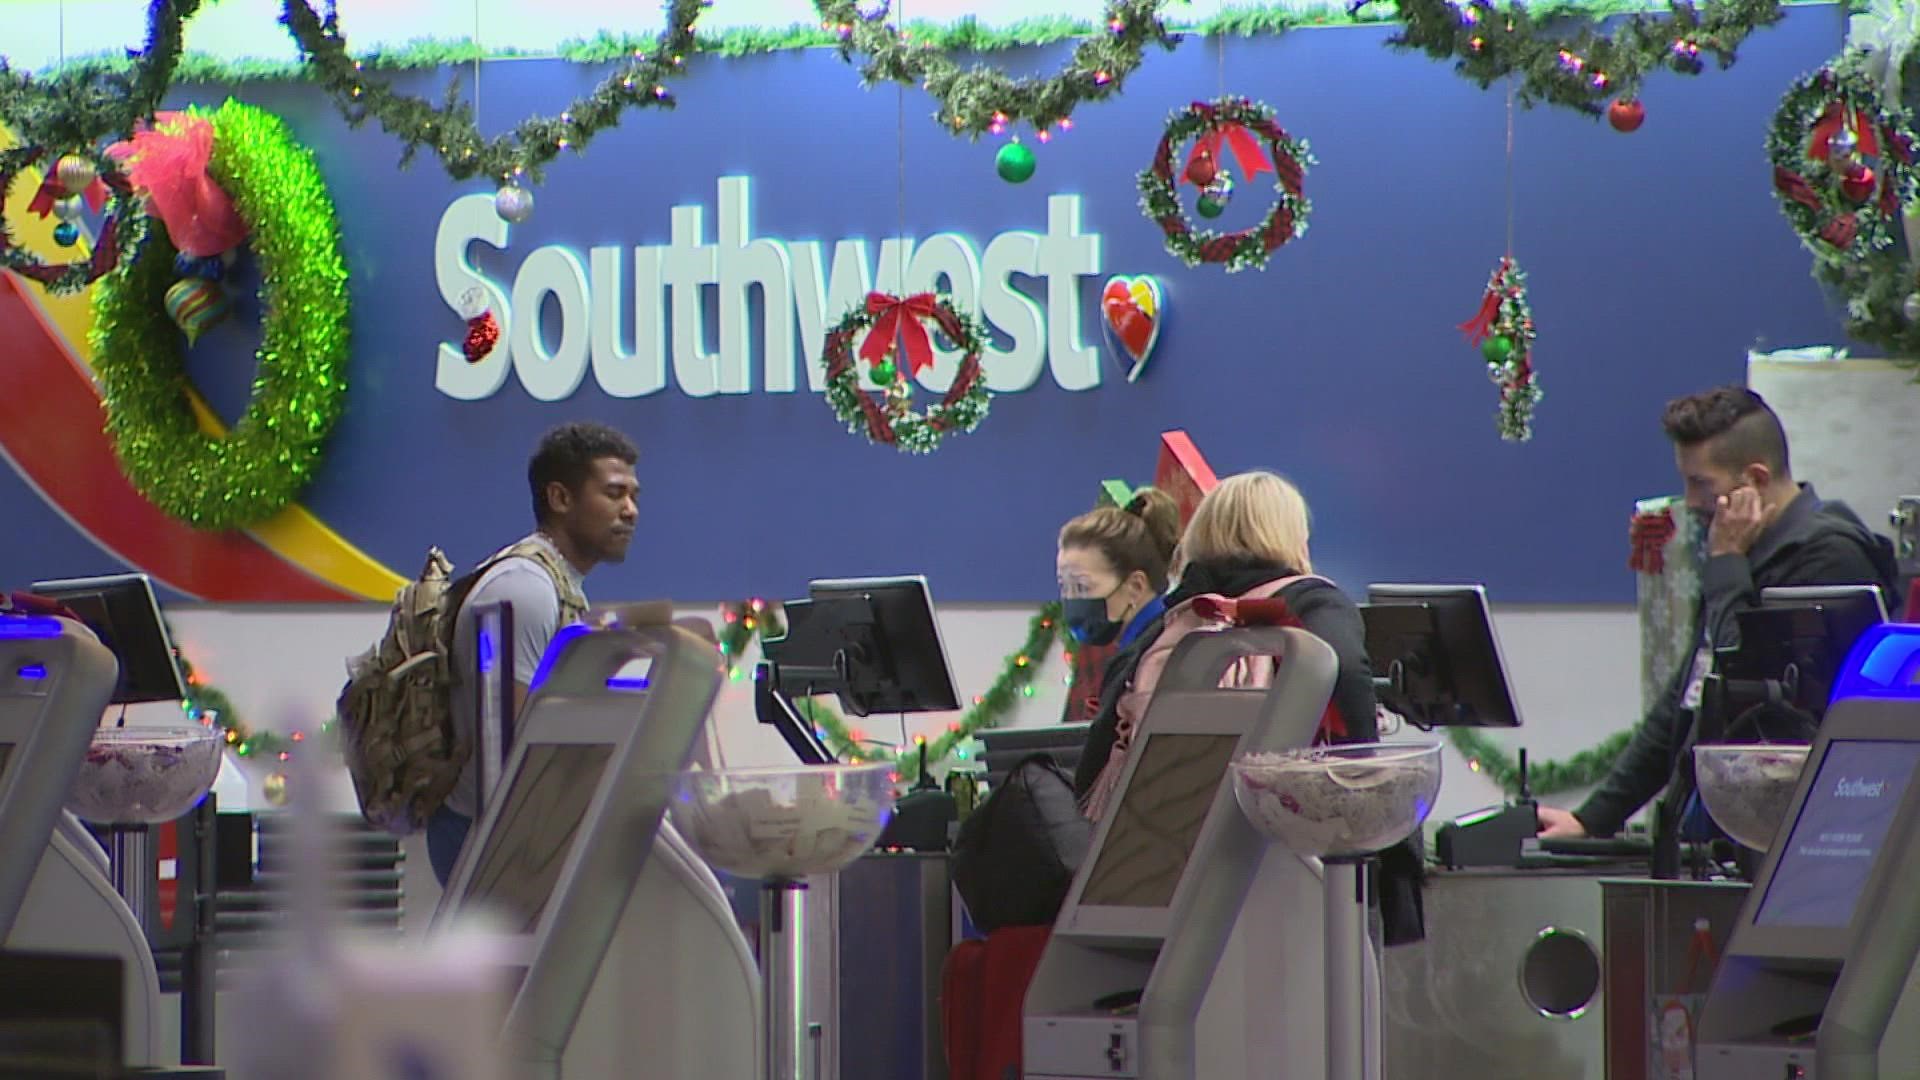 While all carriers saw disruptions leading up to Christmas, Southwest led the charge.